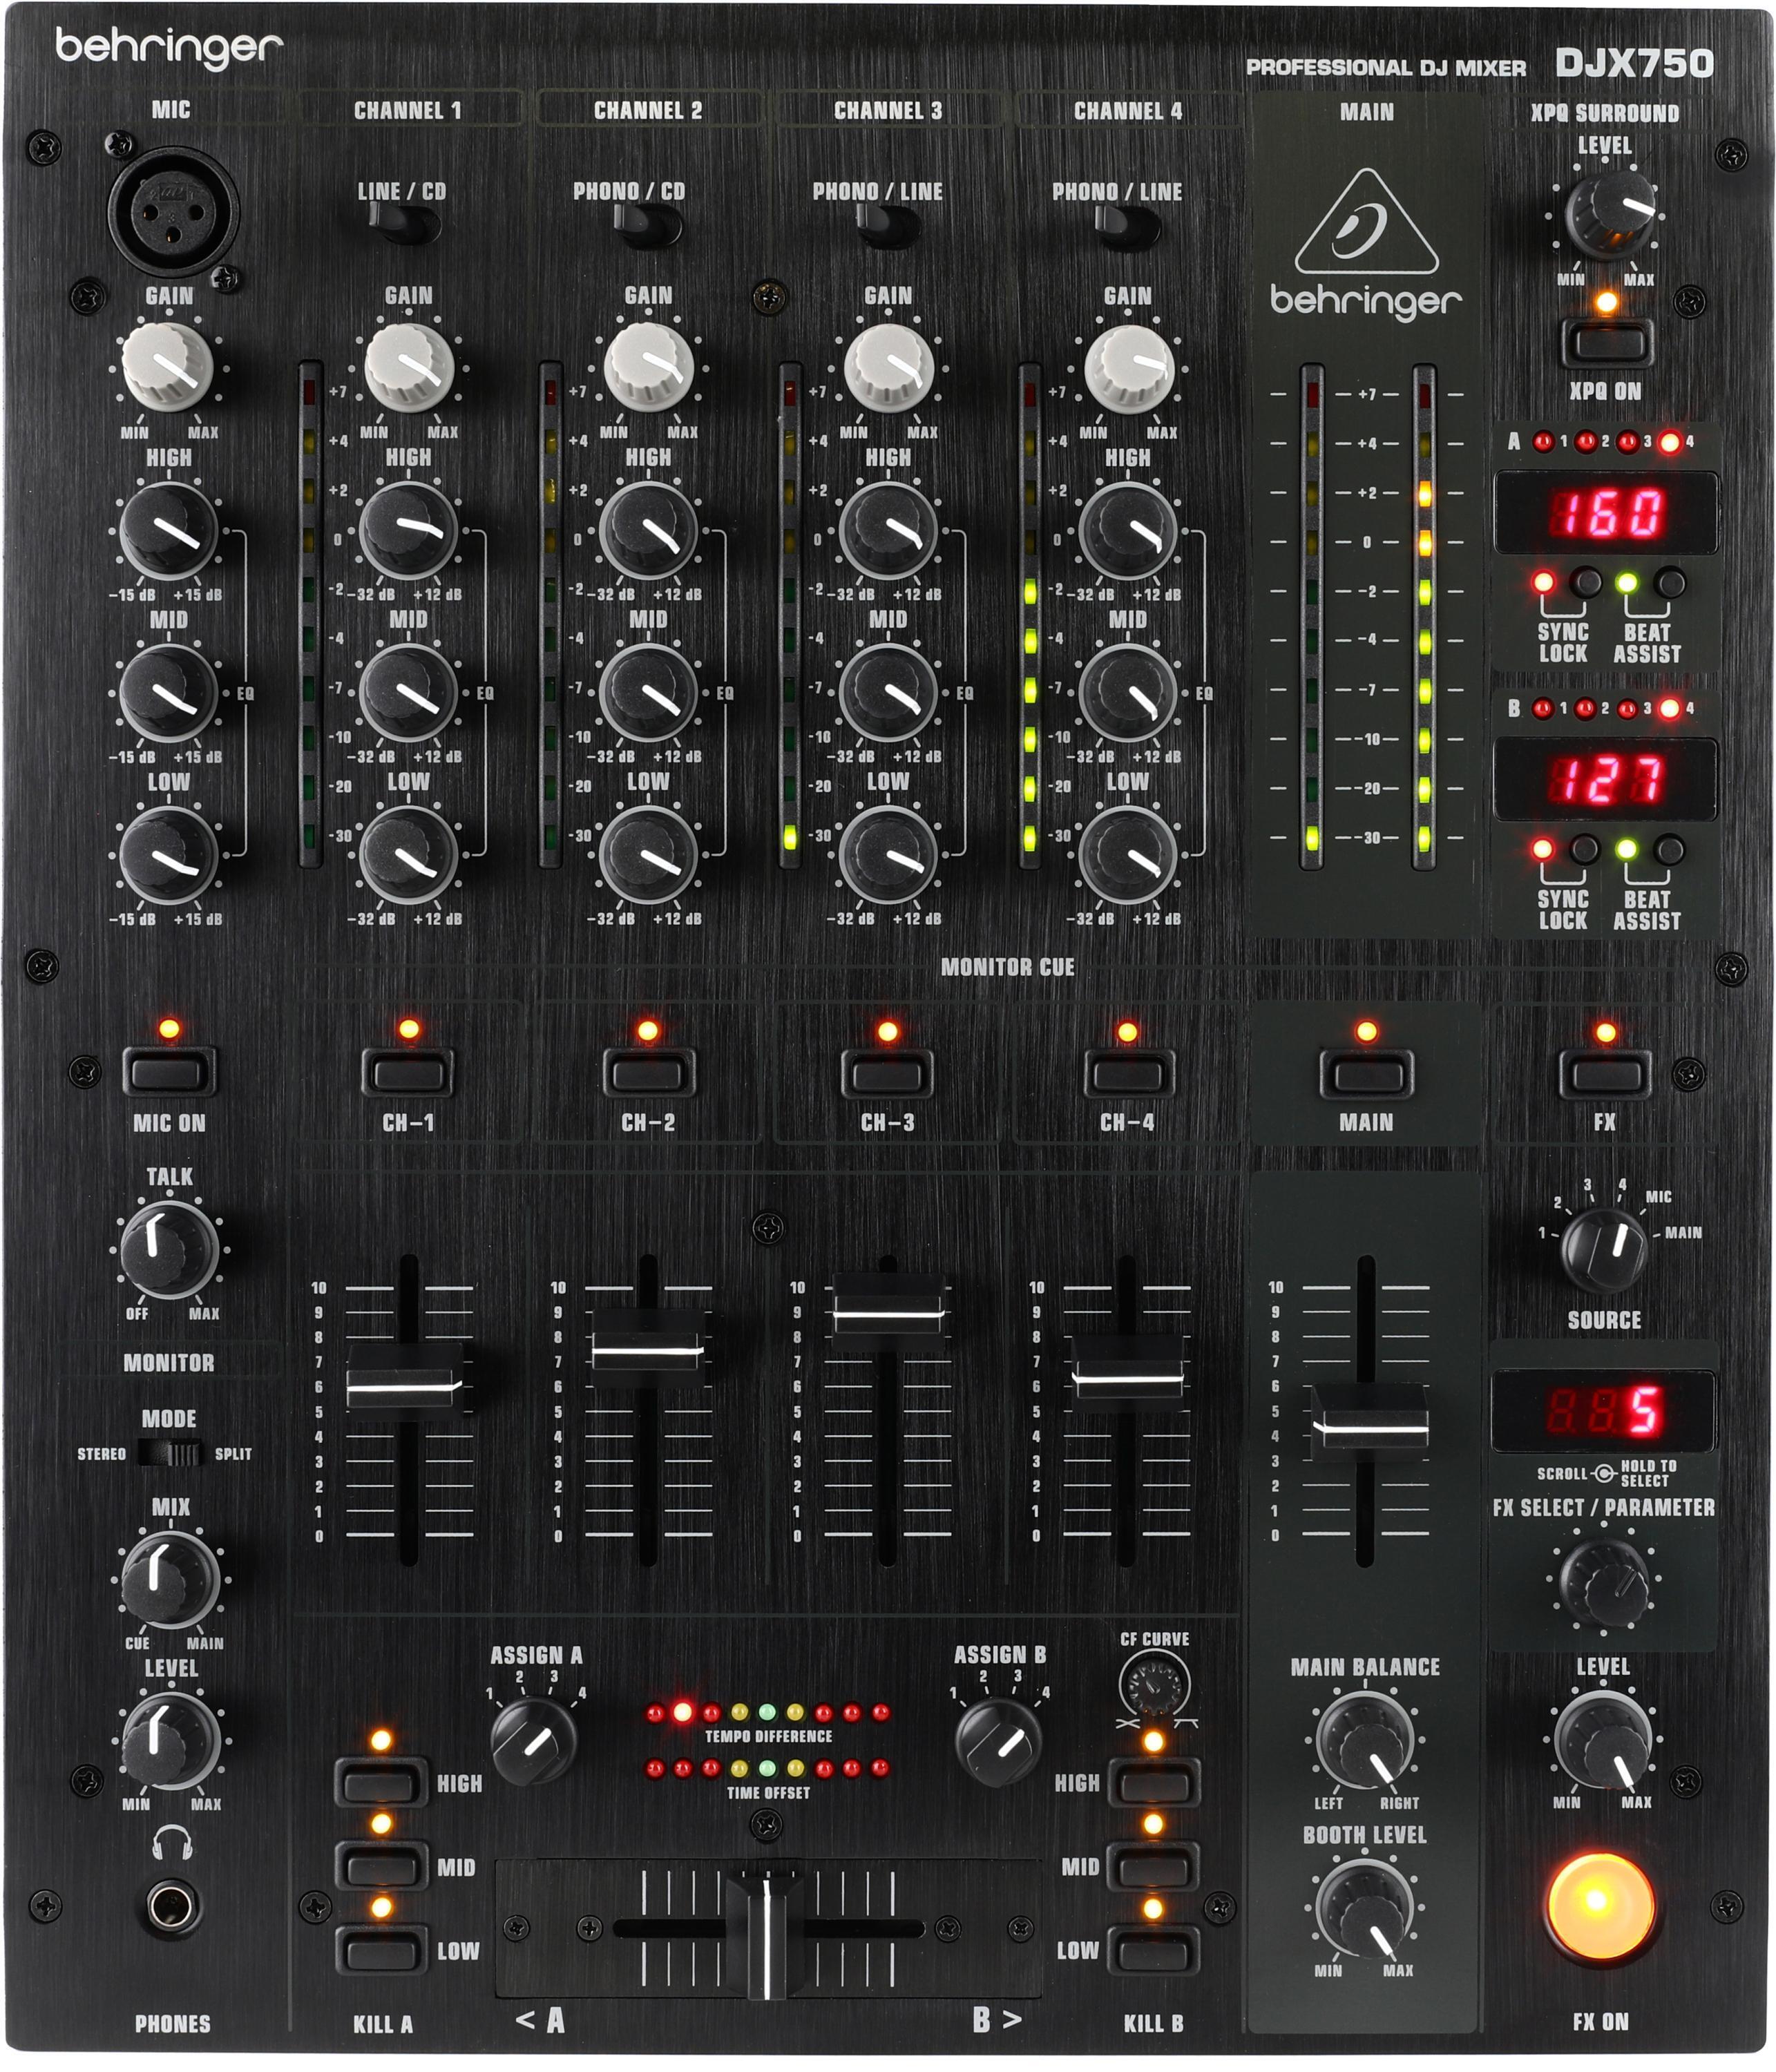 Behringer Pro Mixer DJX750 4-channel DJ Mixer | Sweetwater